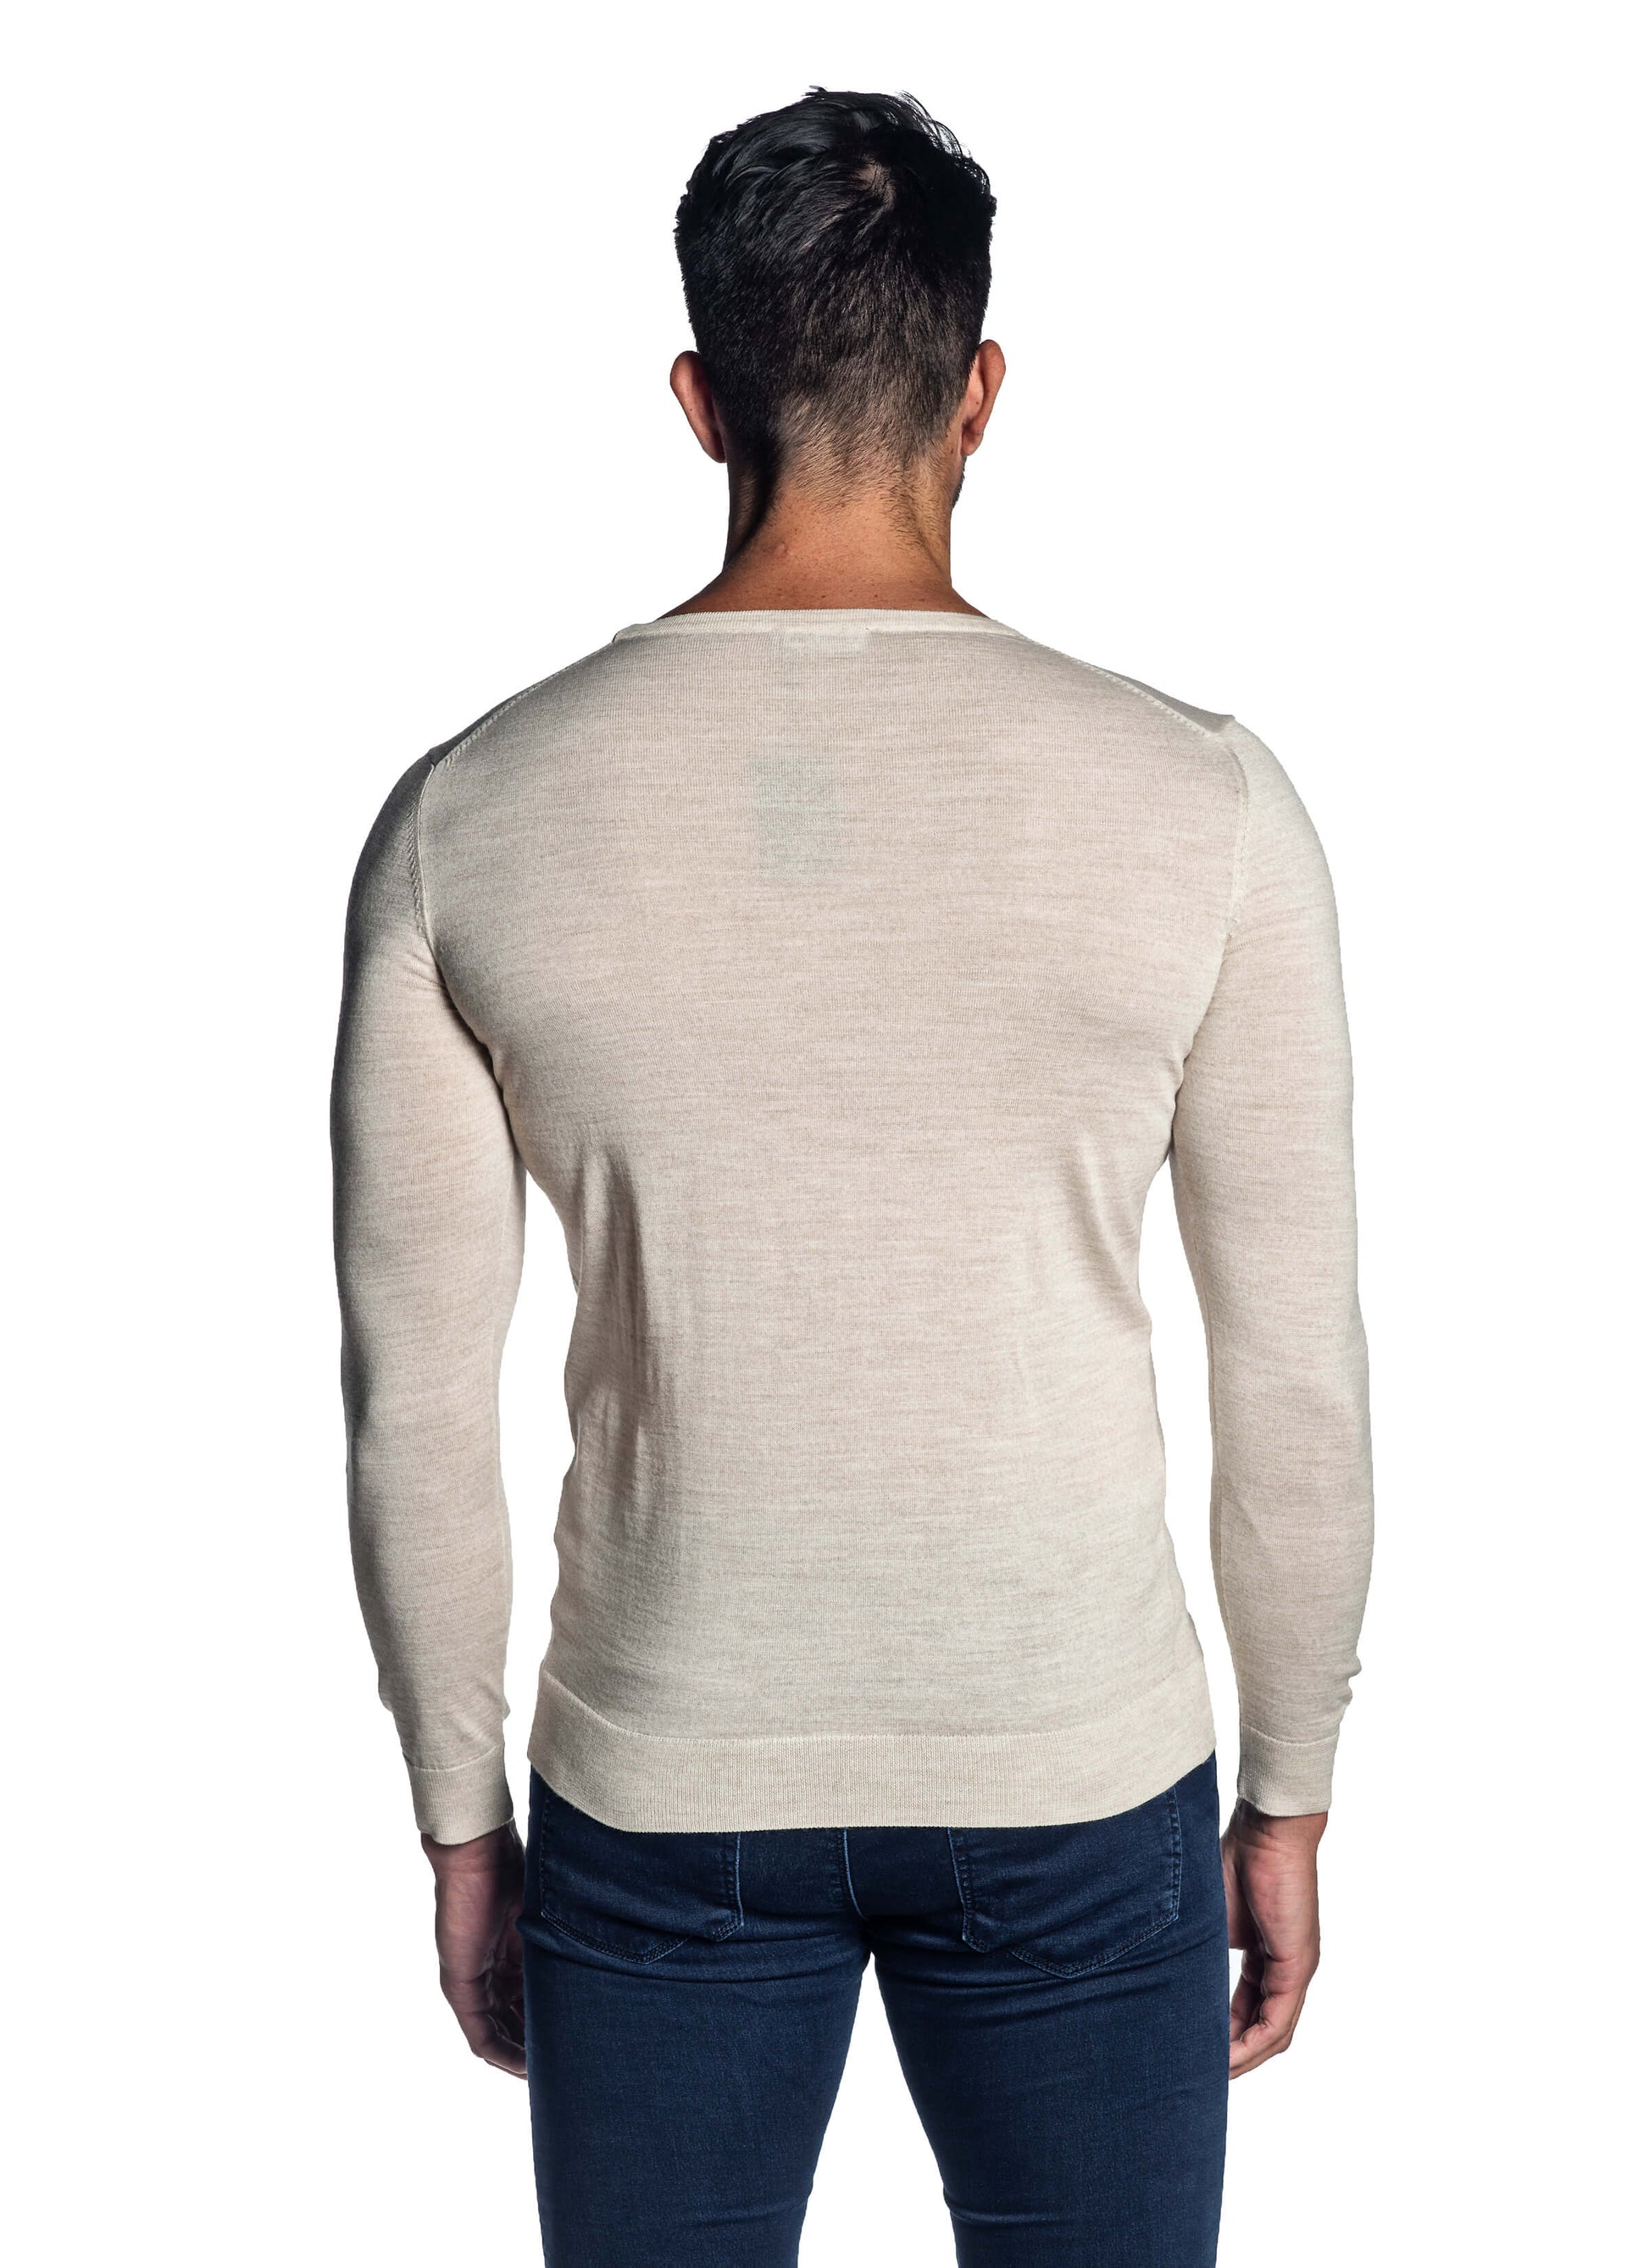 Off-White Crew Neck Sweater for Men H-02682-05 - Back - Jared Lang